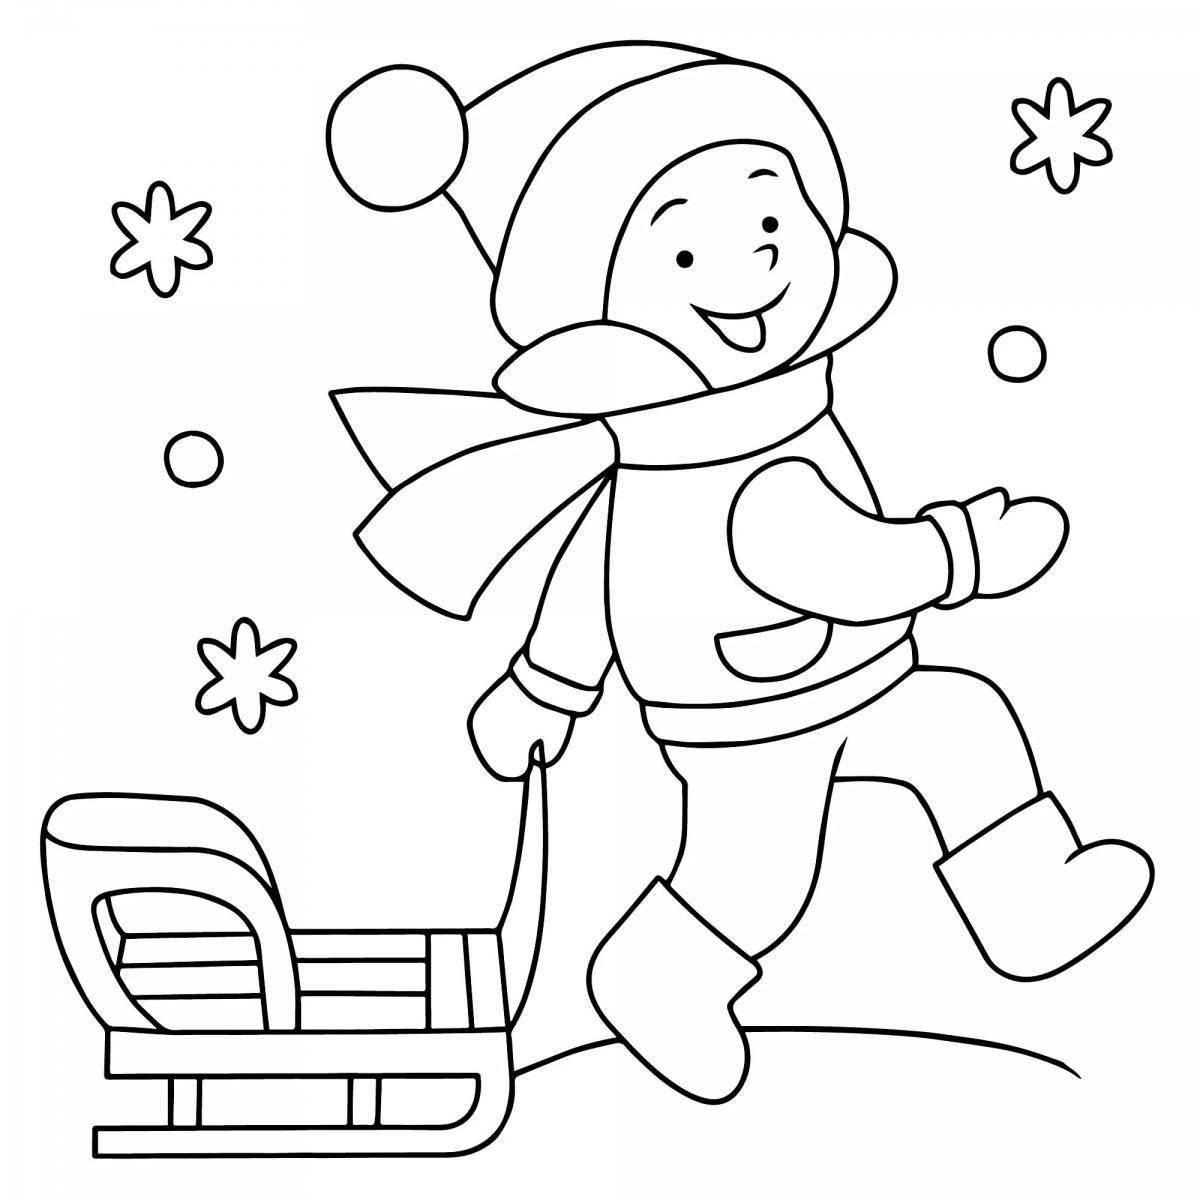 Magic coloring winter for children 4 years old